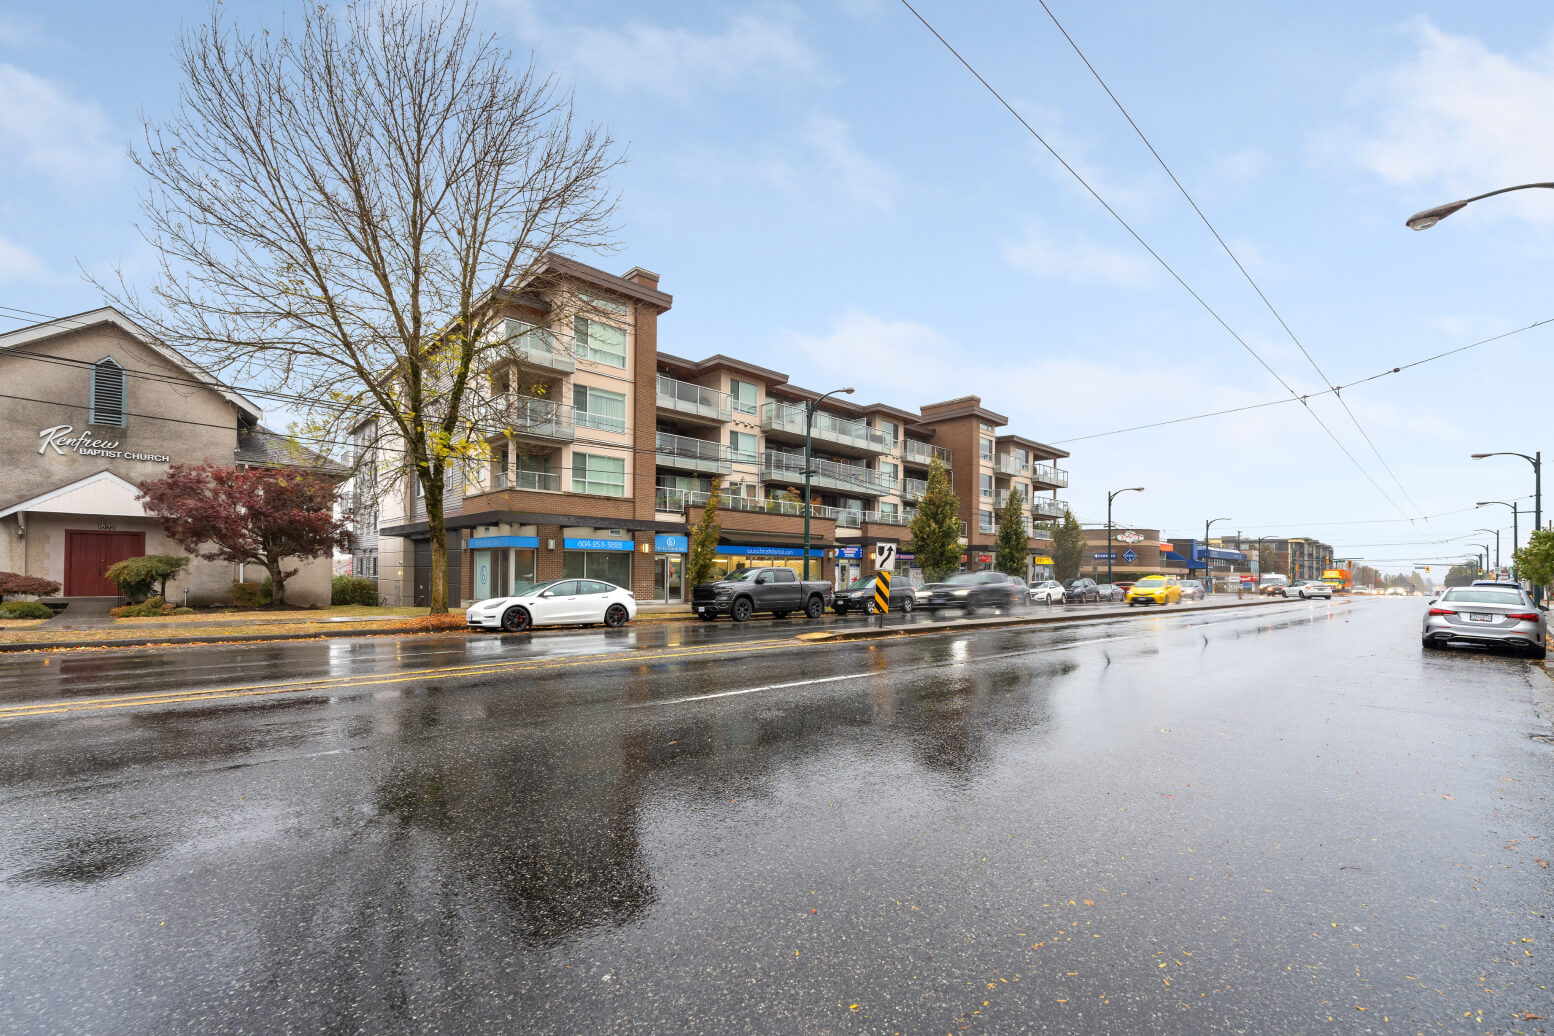 1821-1831 Renfrew Street facade picture retail strata investment for sale in Vancouver by LUK commercial real estate group